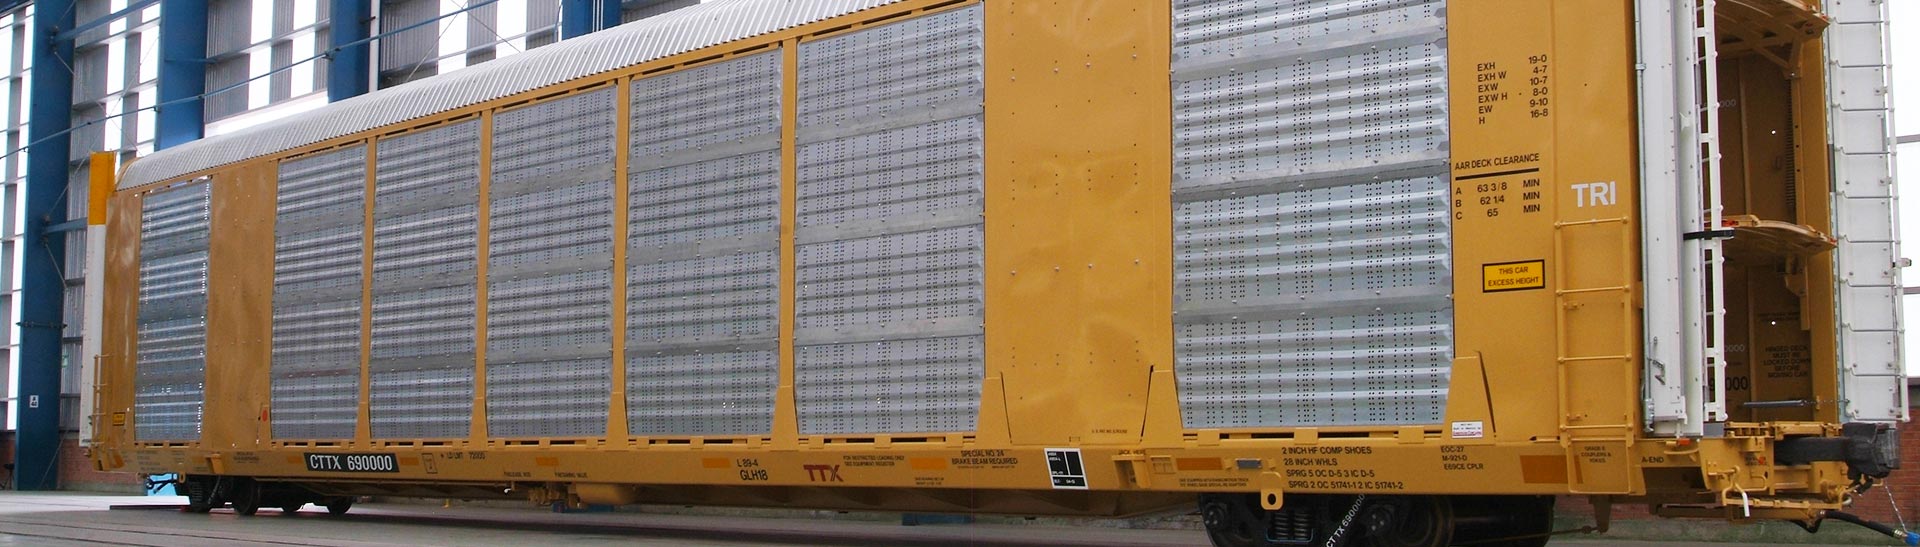 Multi-Max™ is The Greenbrier Companies’ newest automotive railcar offering.